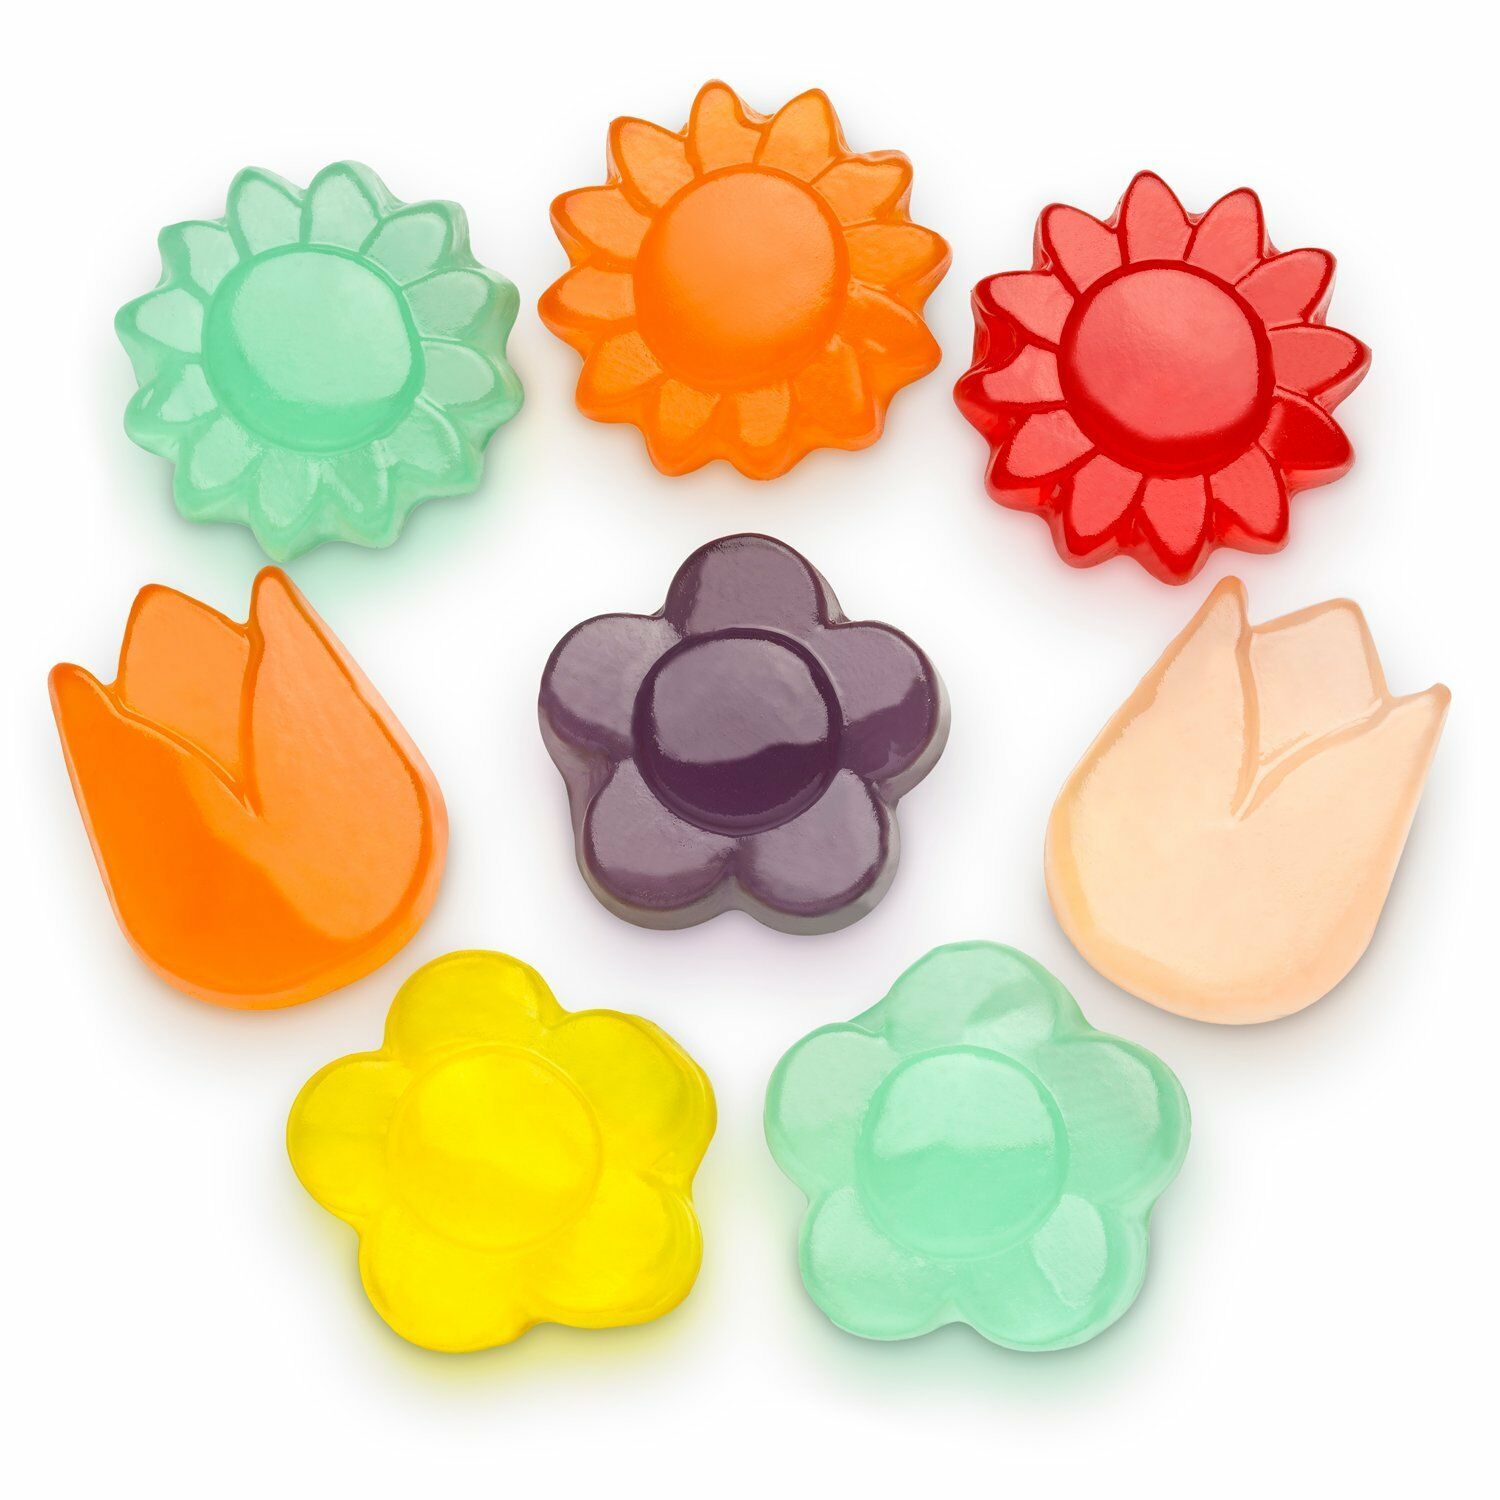 GUMMY CANDY AWESOME BLOSSOM, 2LBS - $20.64